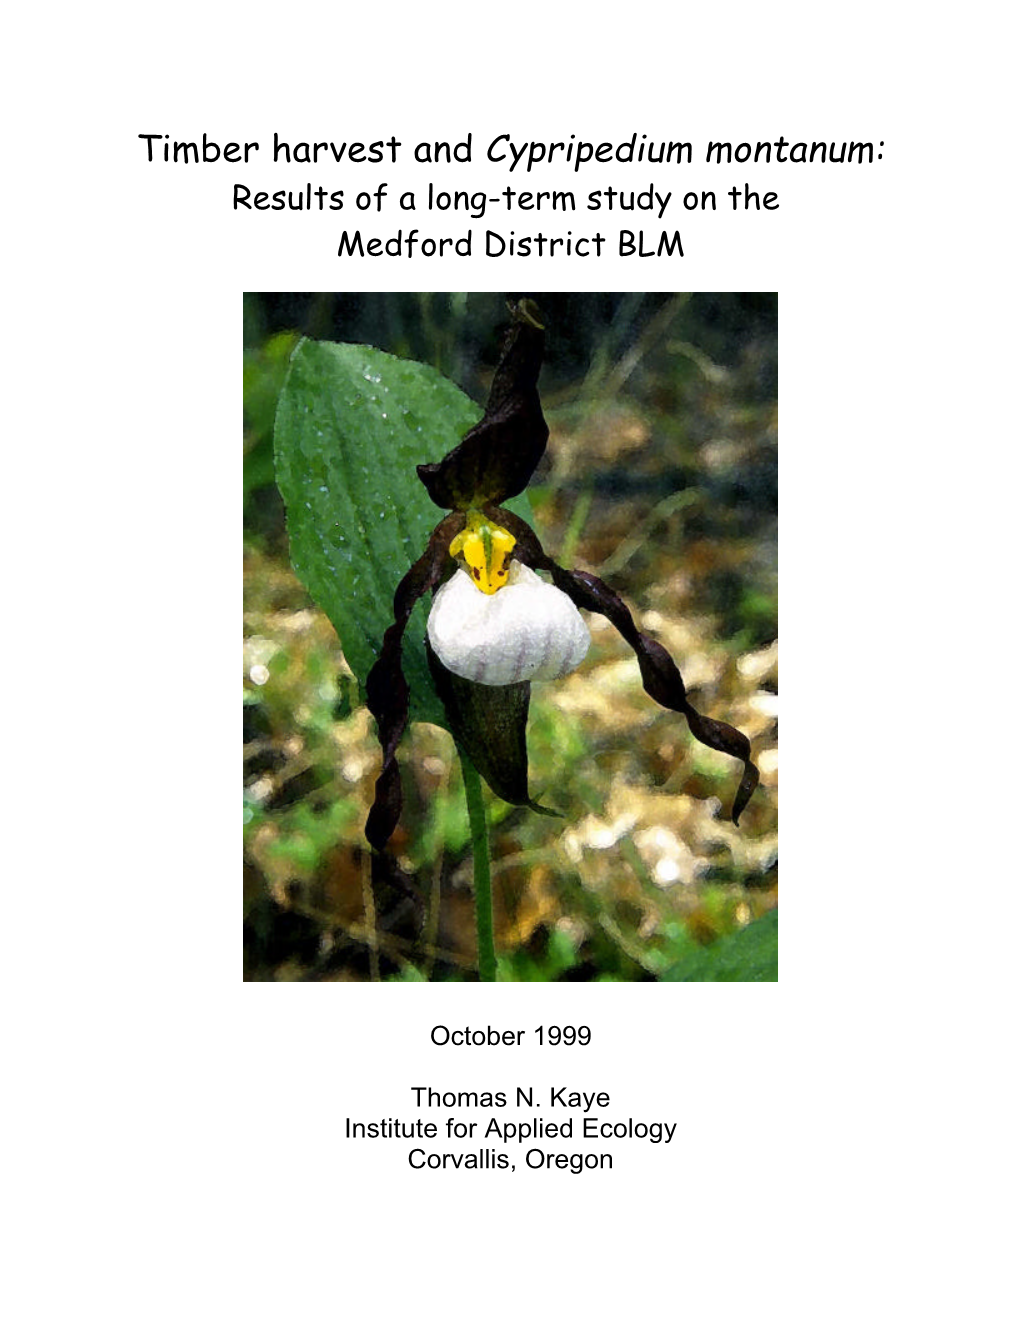 Cypripedium Montanum: Results of a Long-Term Study on the Medford District BLM